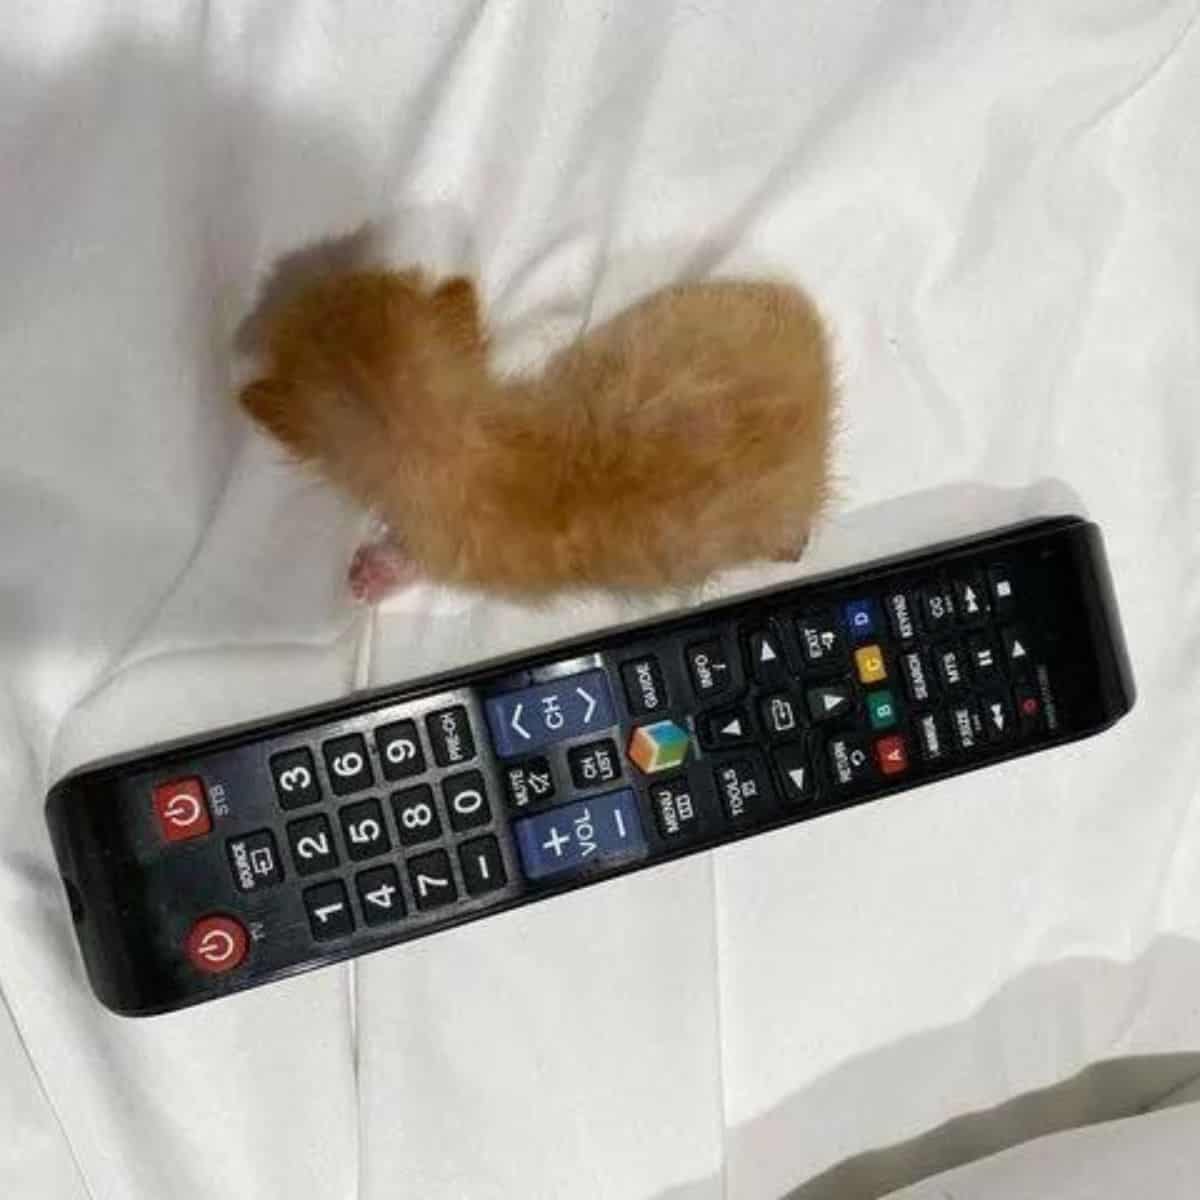 photo of the kitten next to tv remote